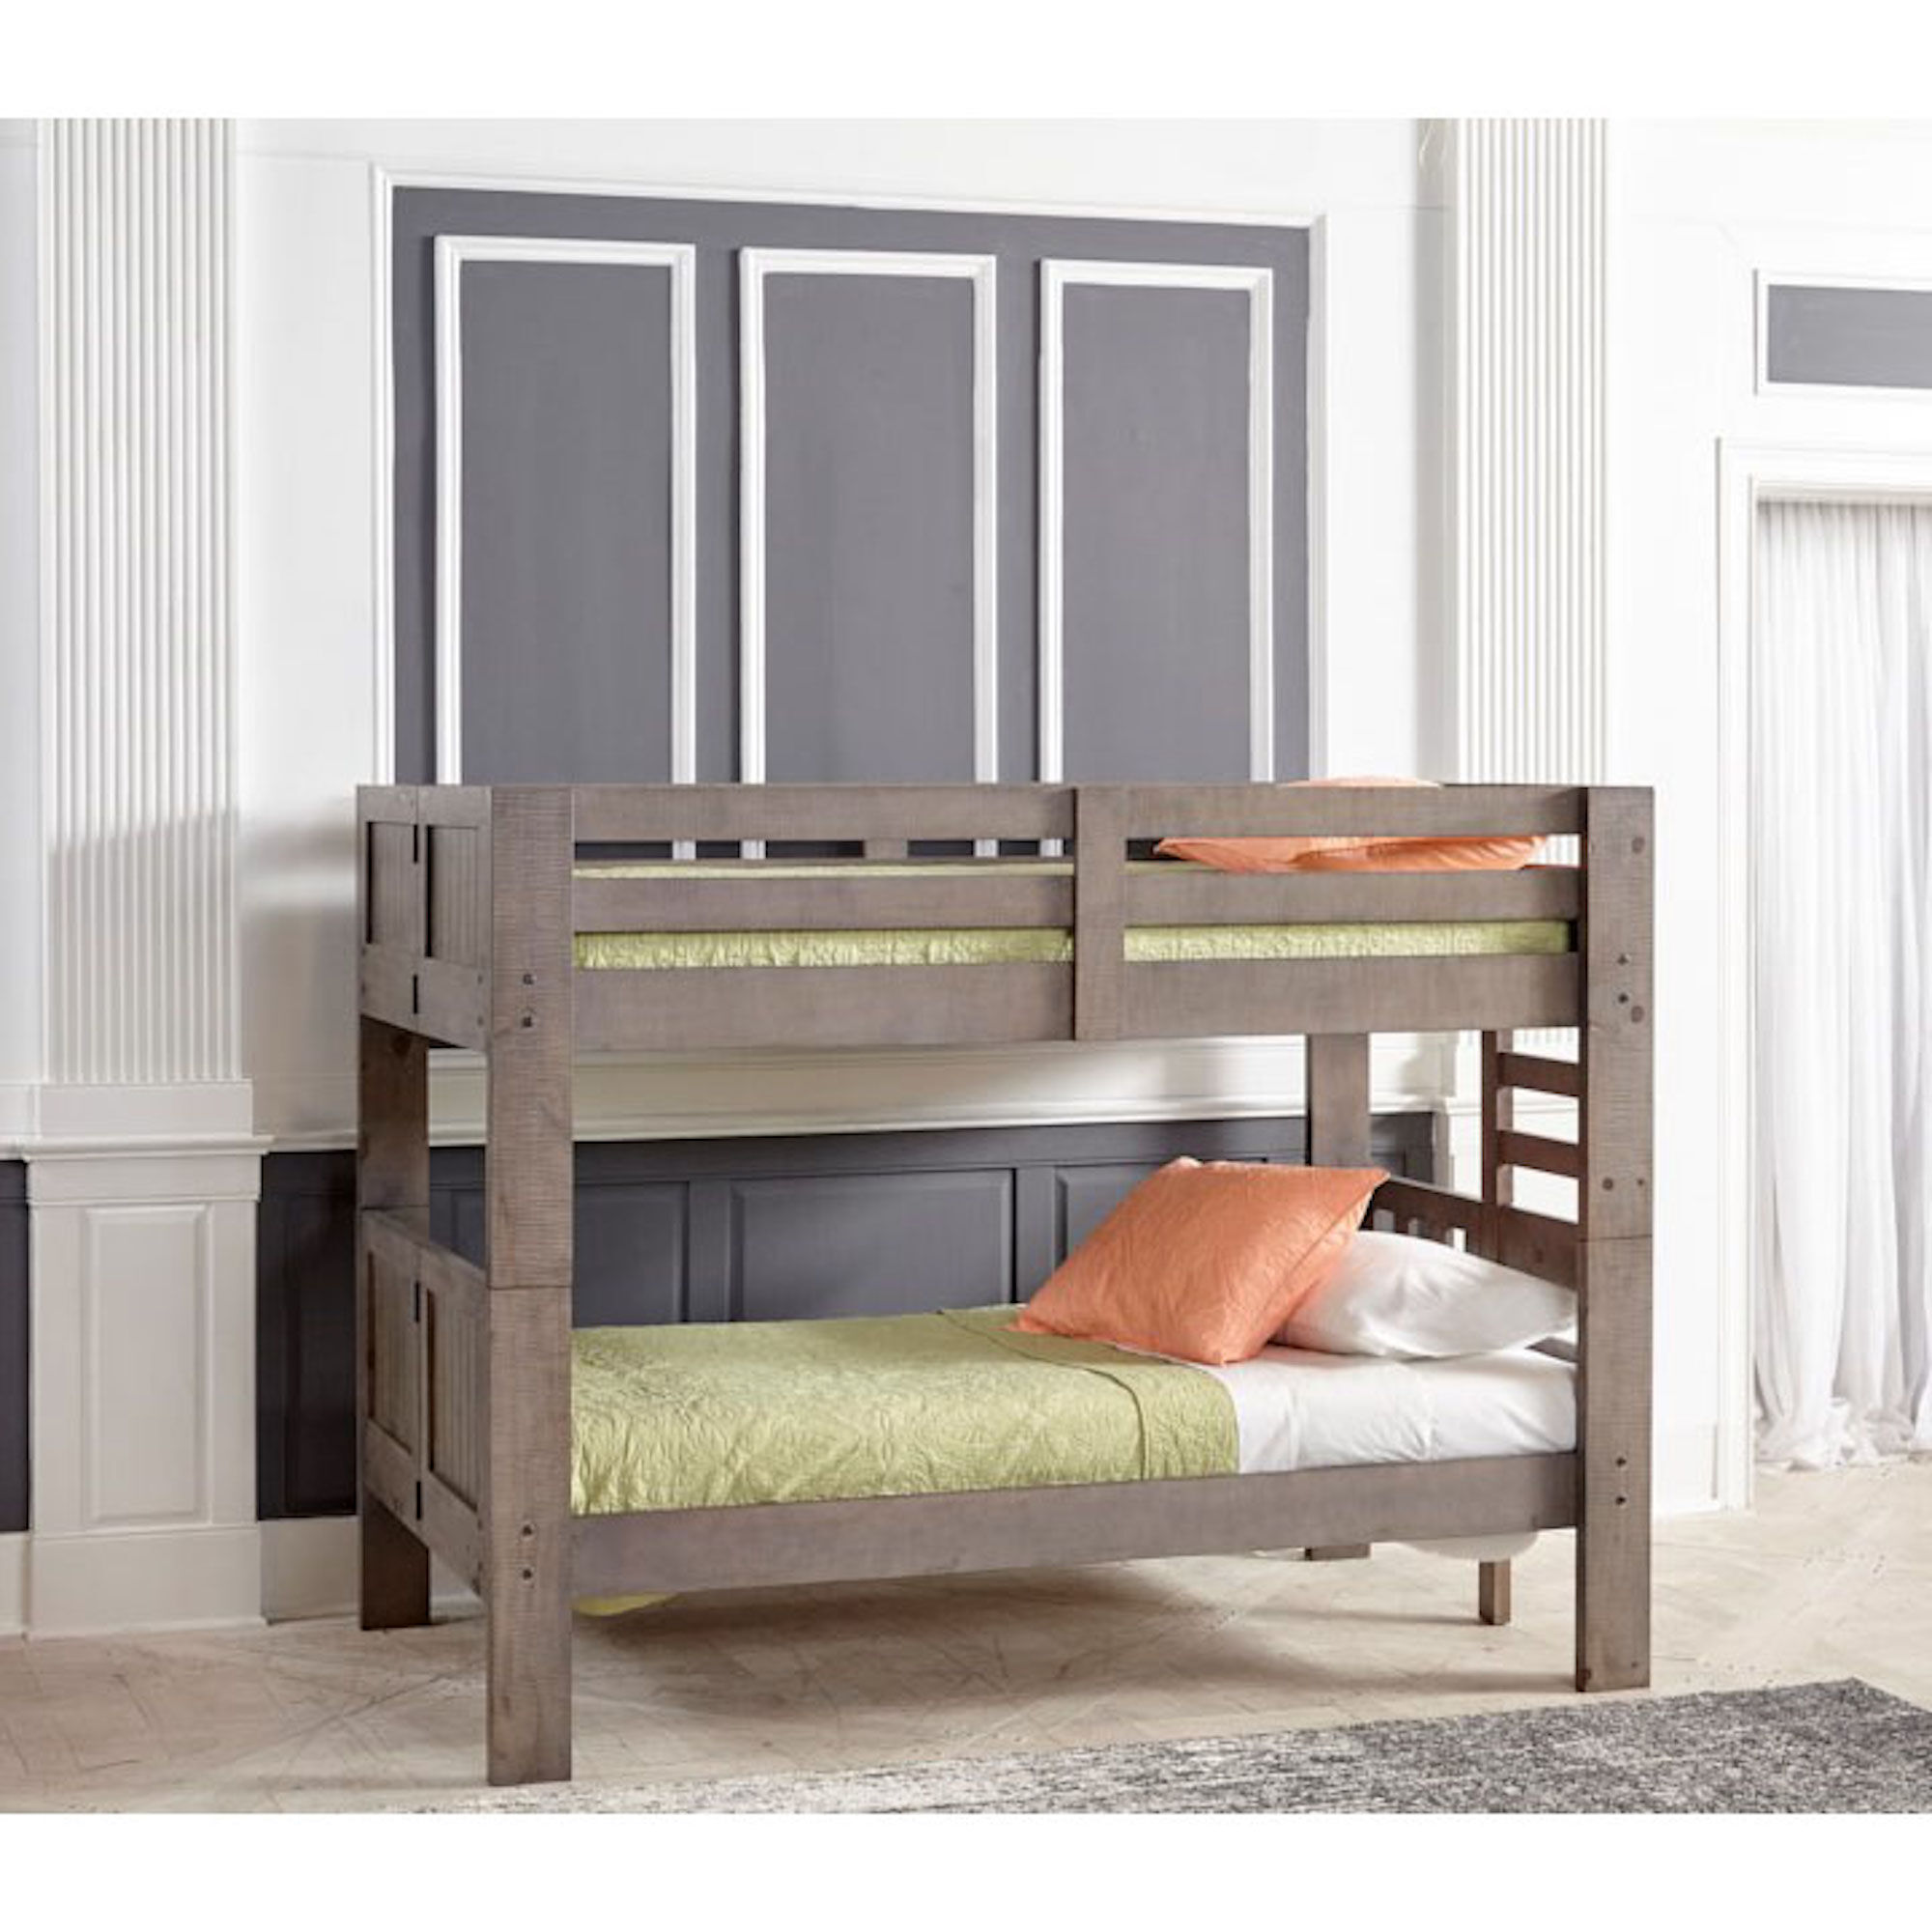 bunk beds for 7 years old